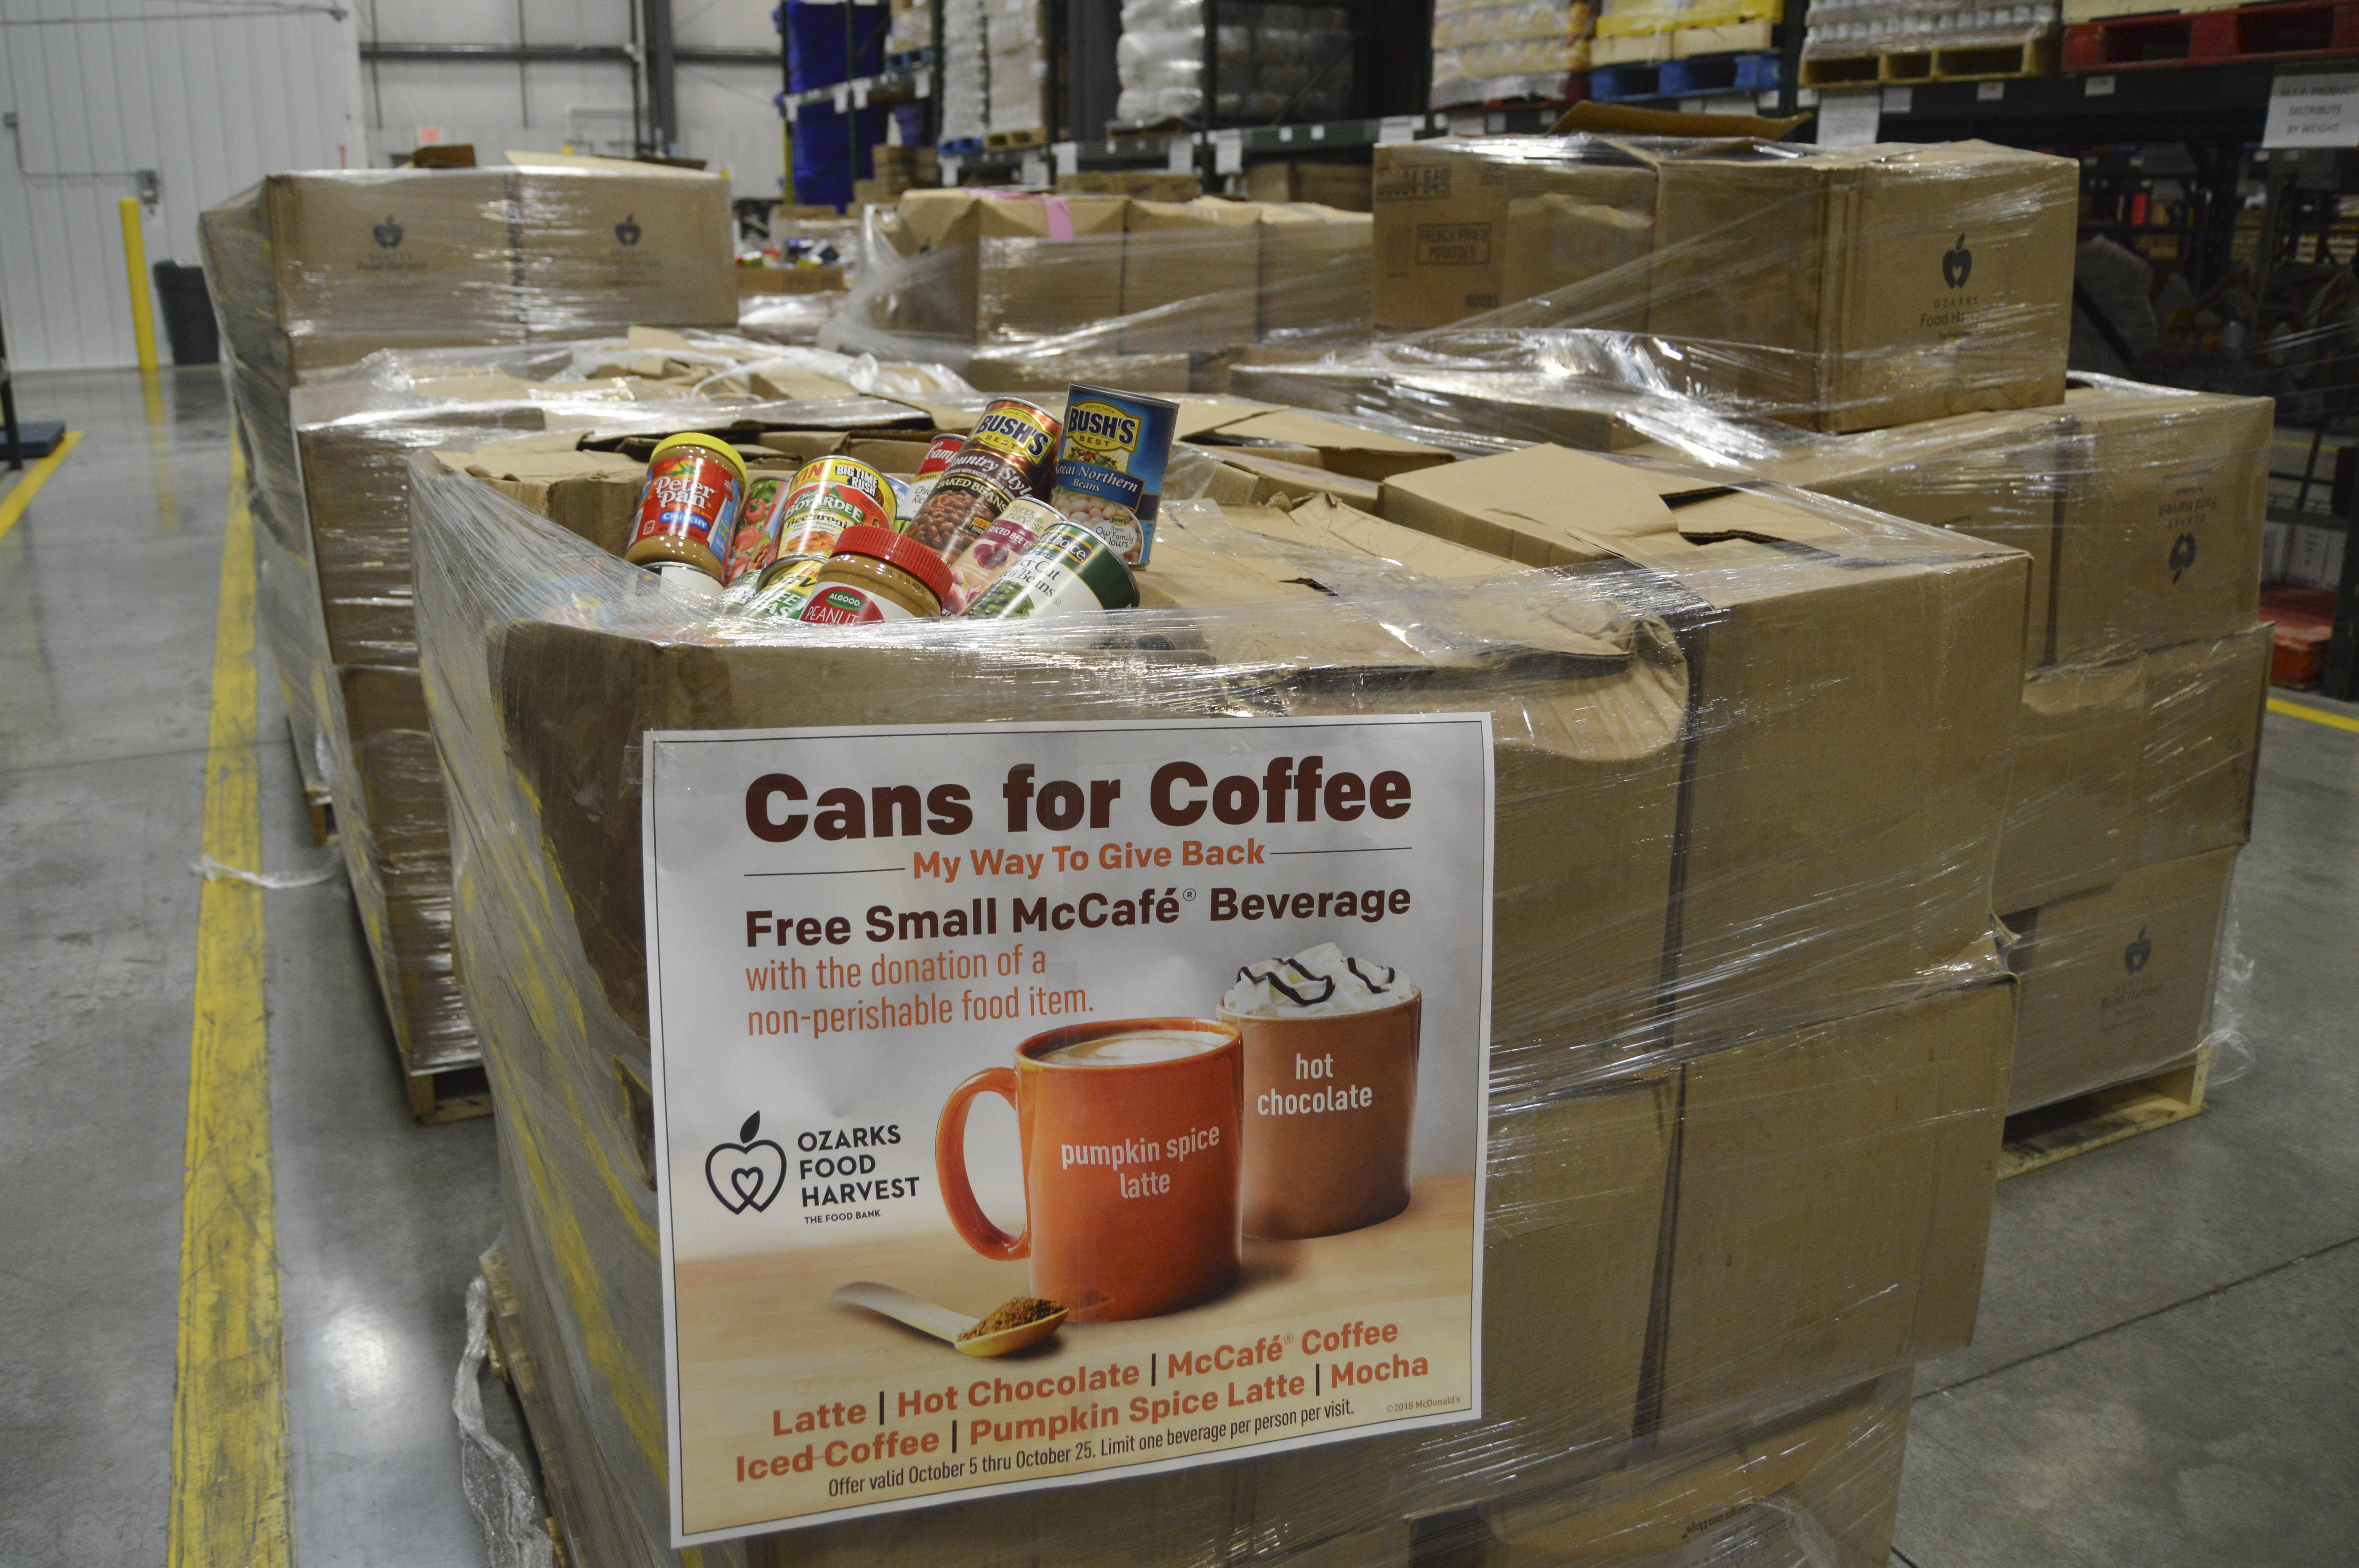 McDonald’s Cans for Coffee food drive provides thousands of meals for families in need